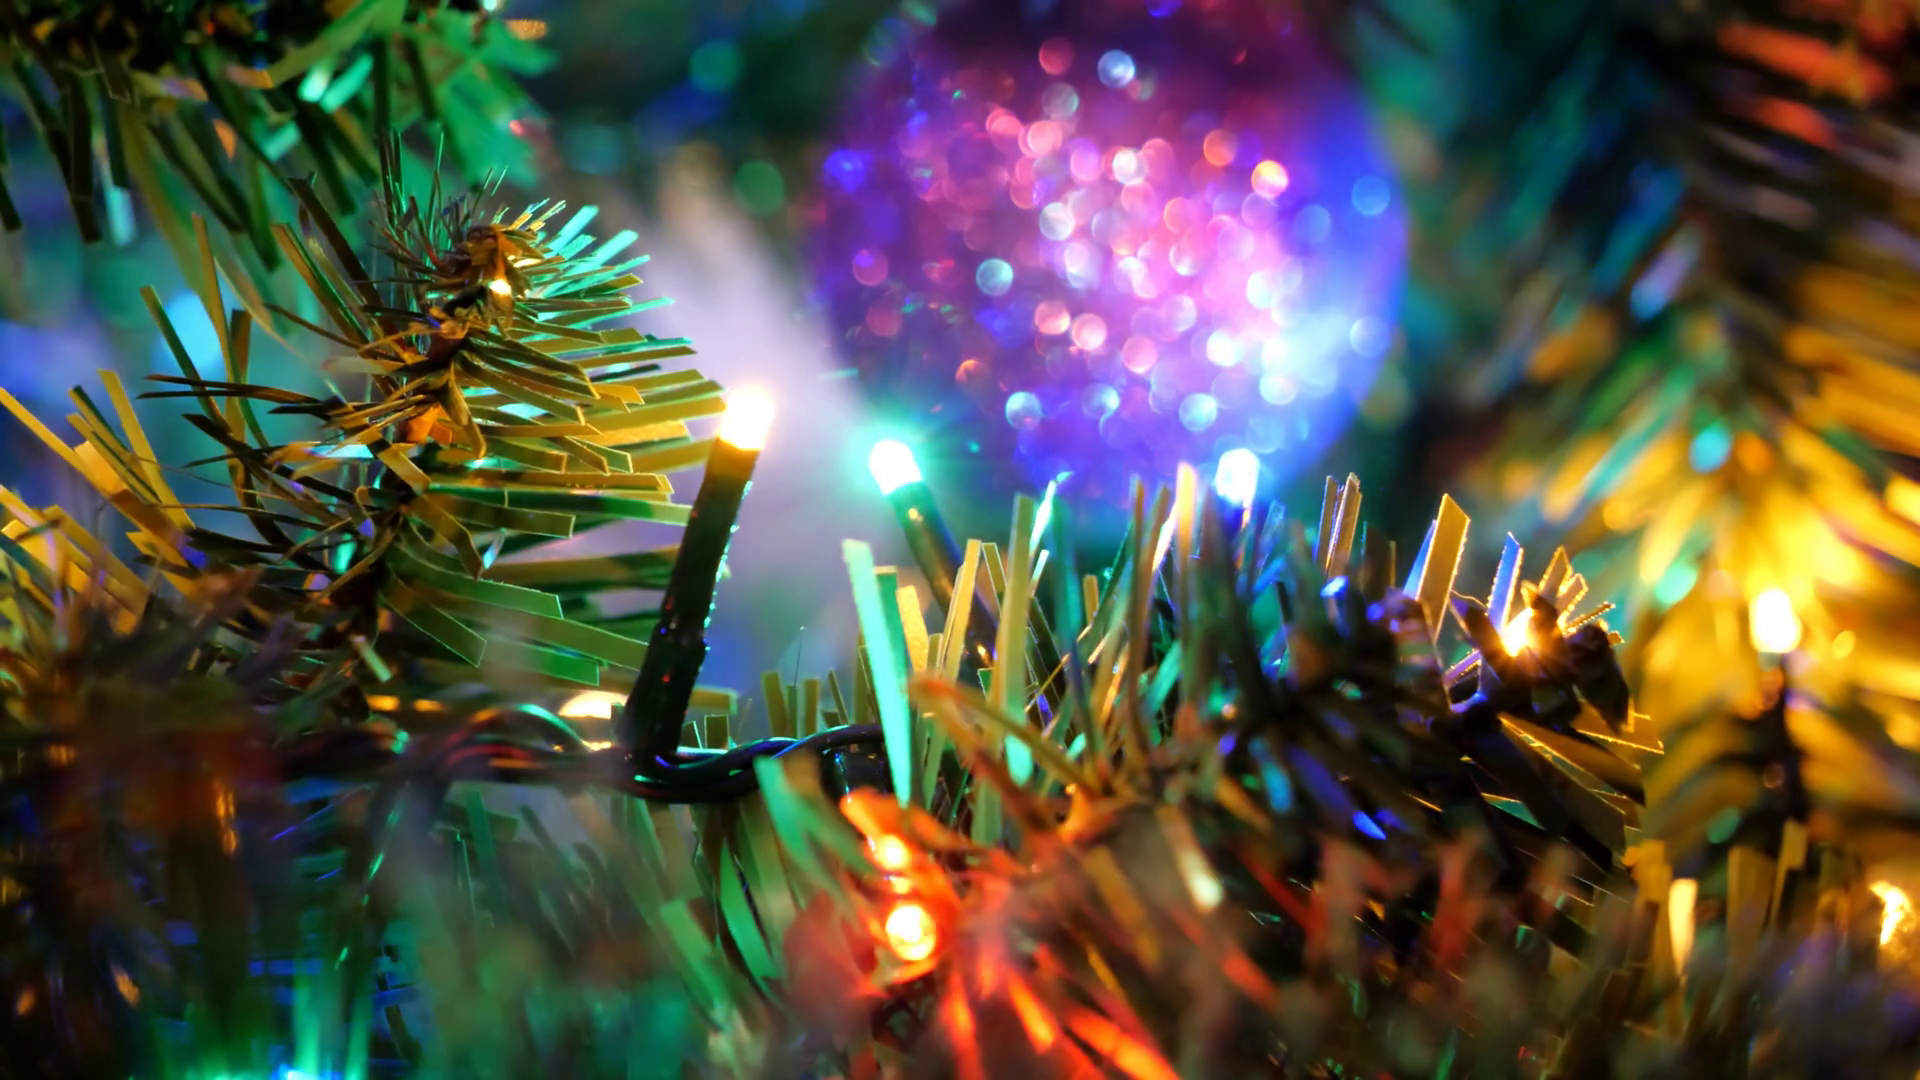 Abstract 4k Video Background Of Blinking Multi Colored Lights And Ornaments In A Christmas Tree Stock Video Footage 00:19 SBV 338964445